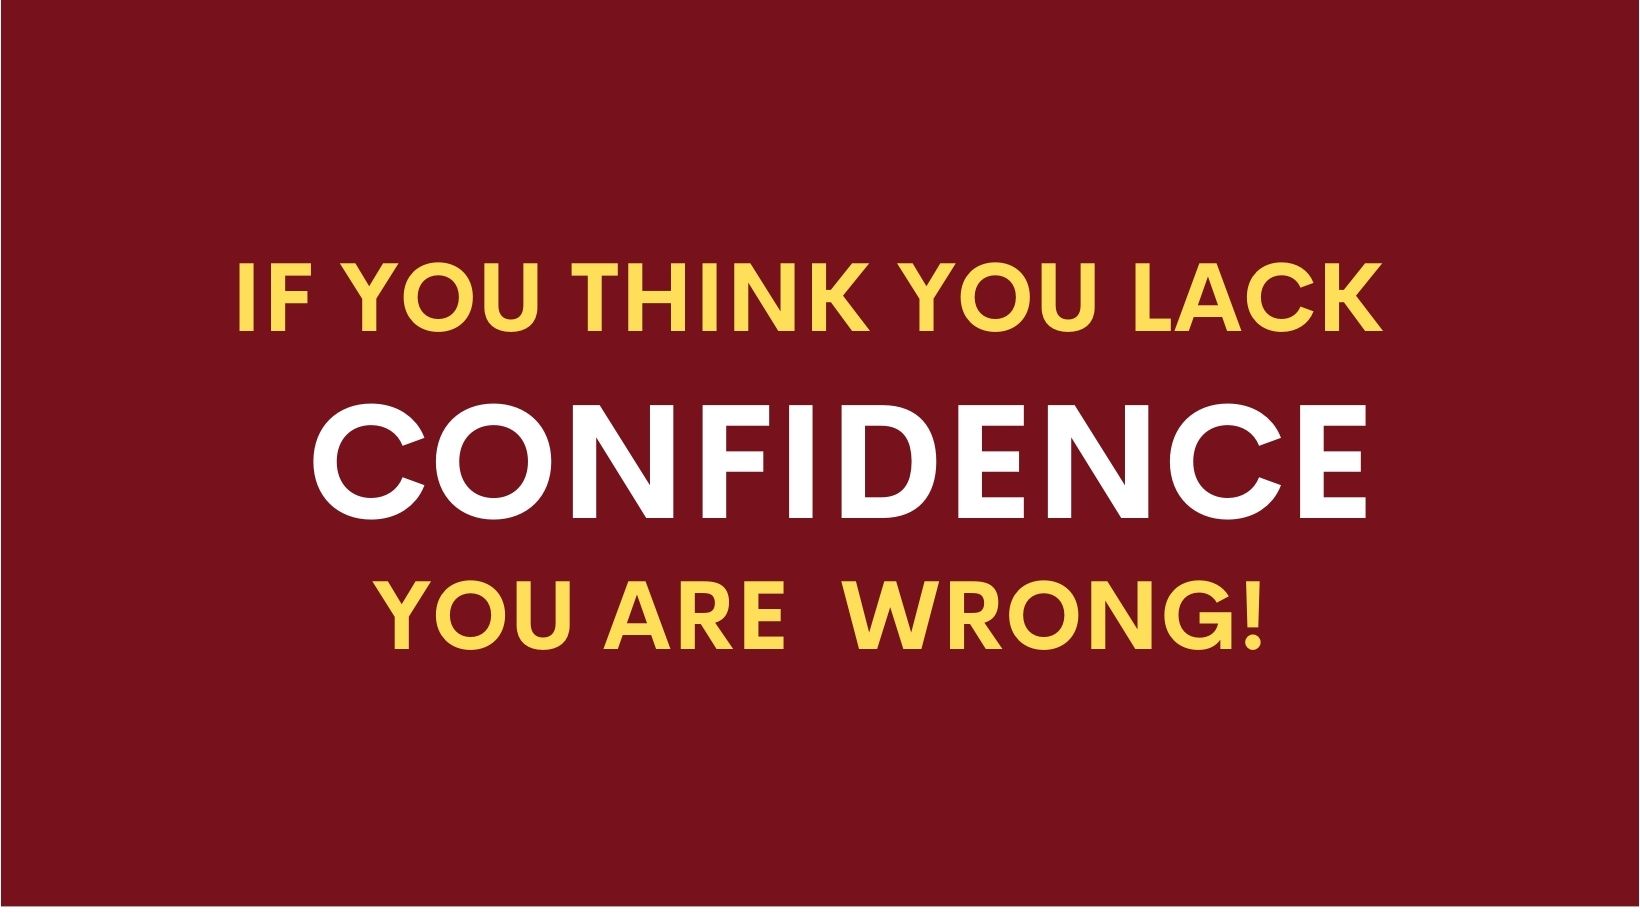 If you think you lack confidence you are wrong